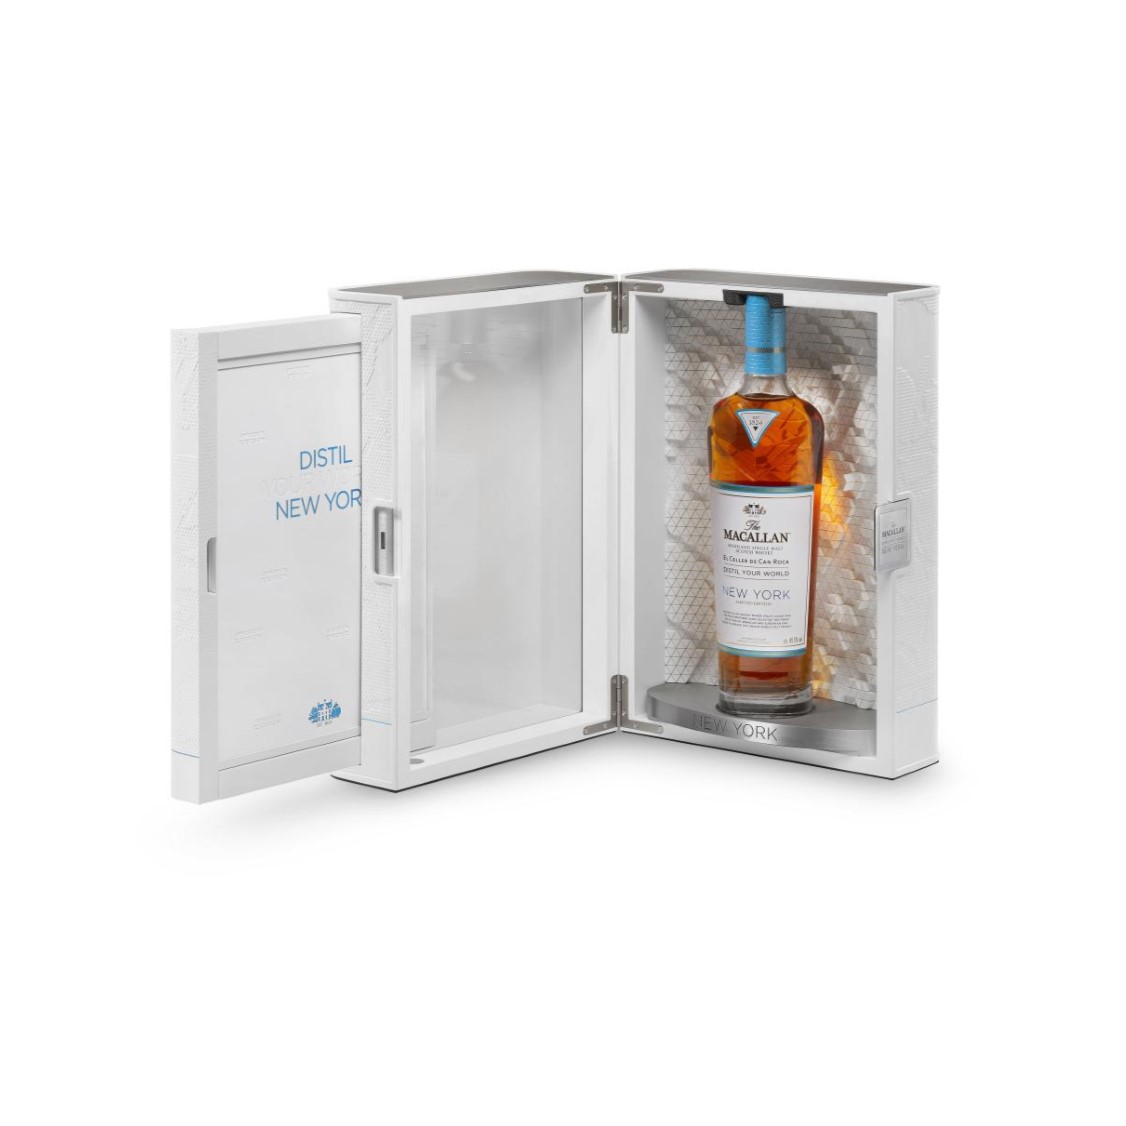 Buy Macallan Distil Your World New York Limited Edition